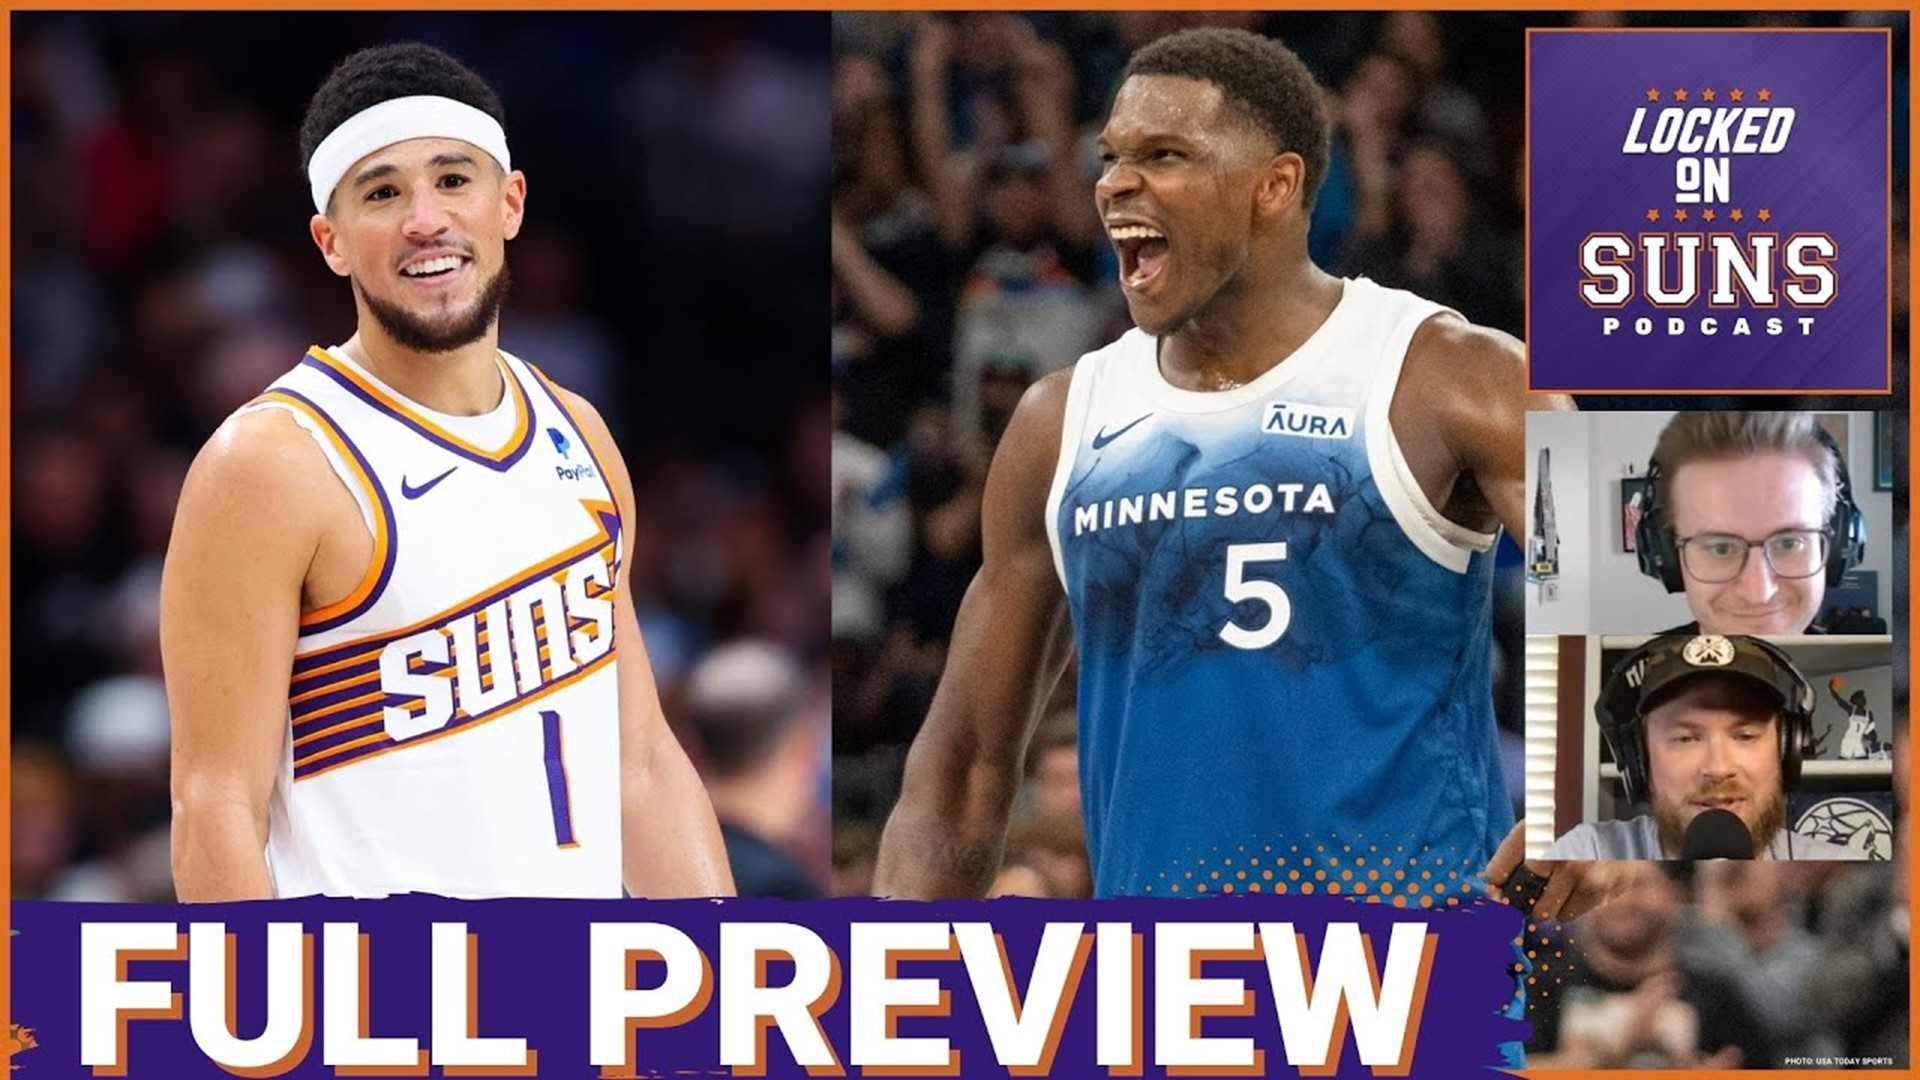 Dive into the key questions, matchups and adjustments as the Phoenix Suns face off against the Minnesota Timberwolves in the NBA playoffs.